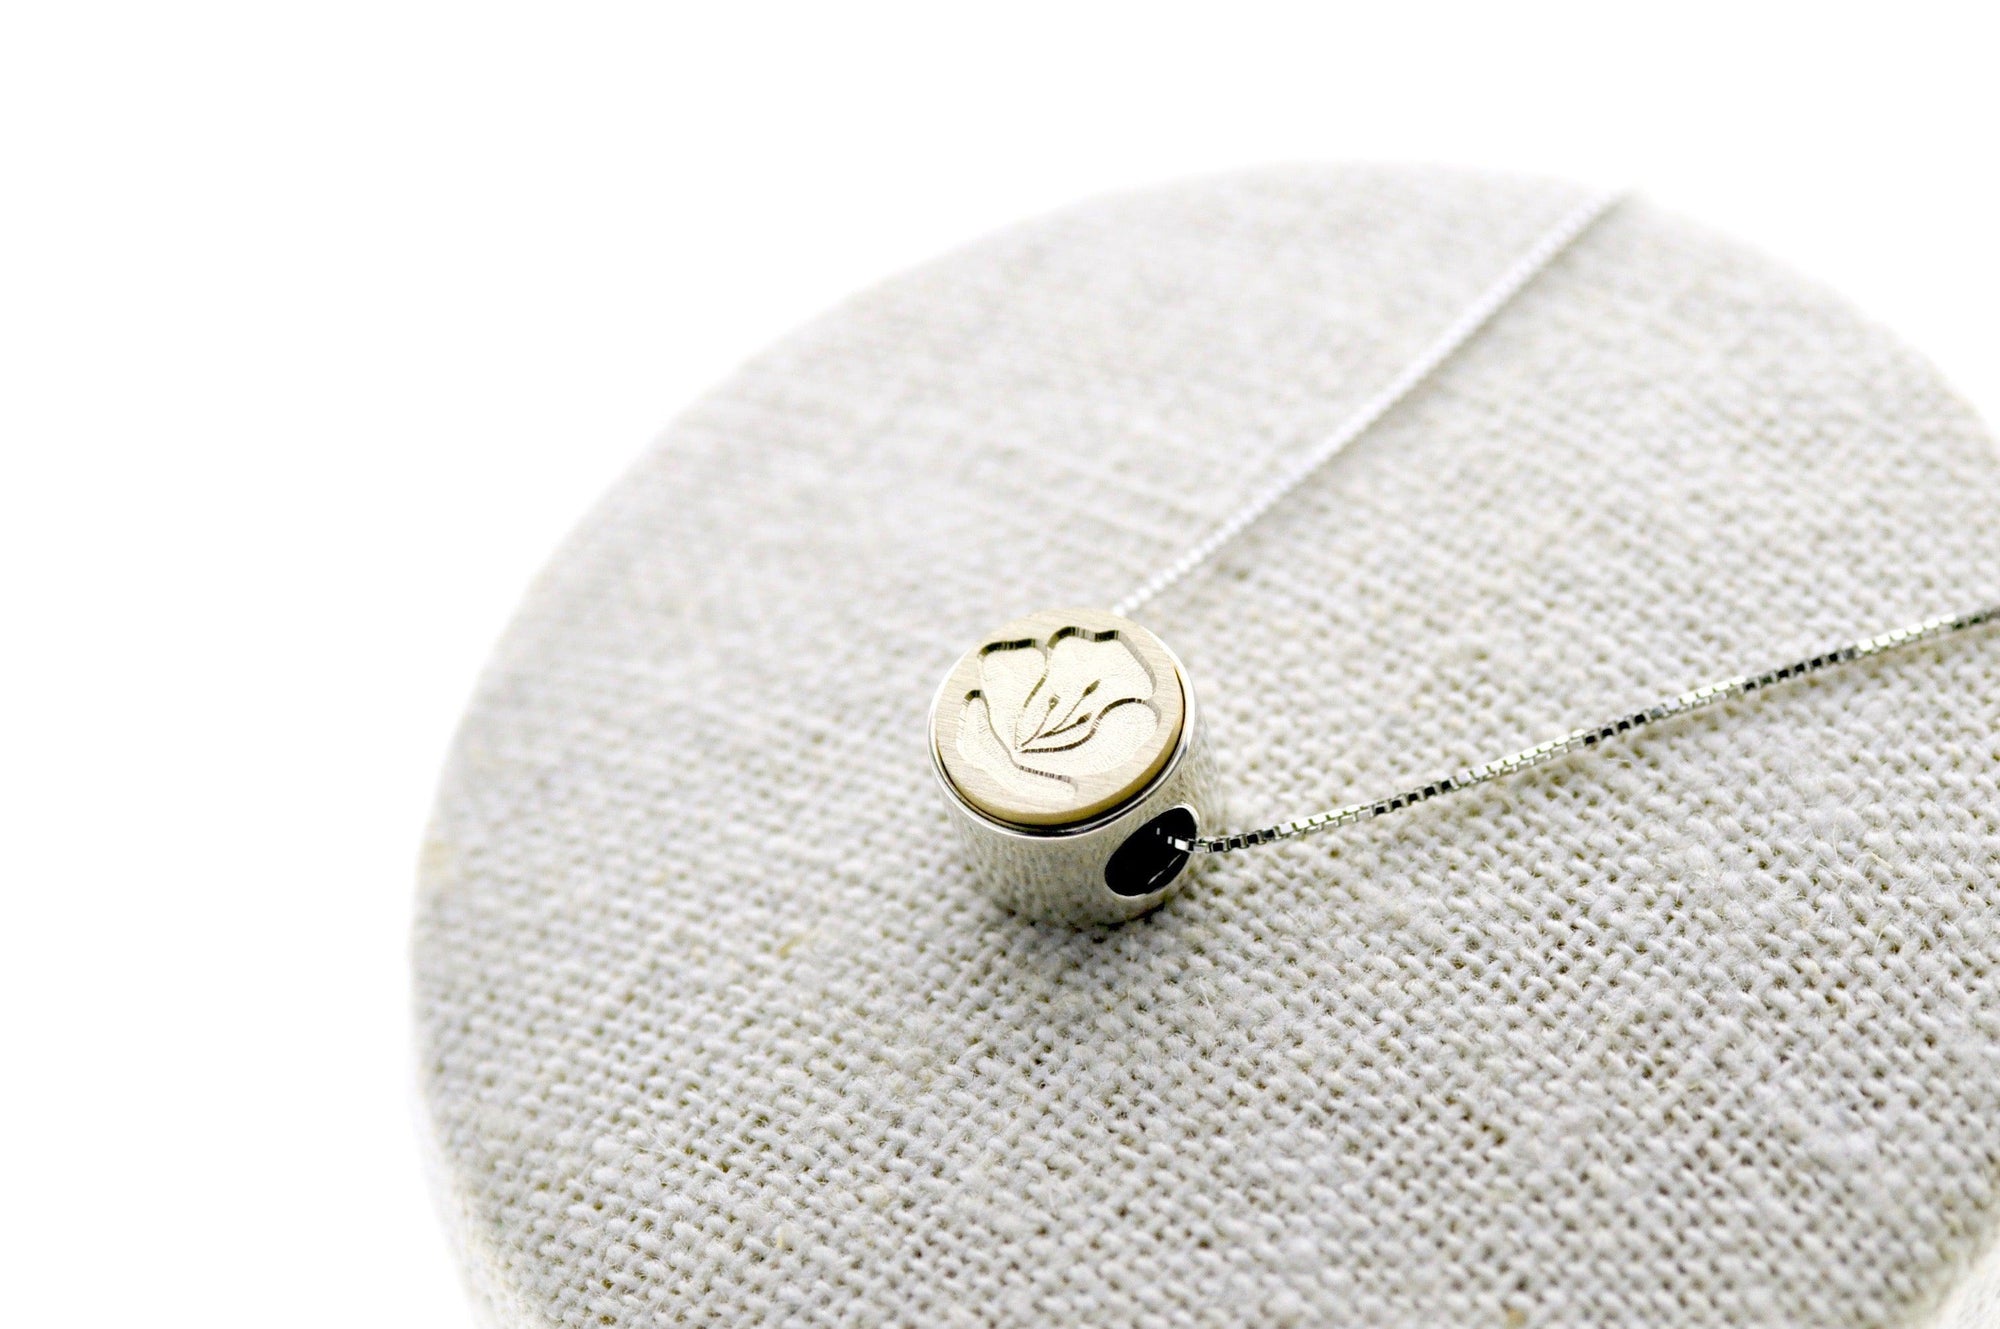 Poppy 2-Side Floating Signet Necklace Designed by Petra - Backtozero B20 - 10mm, 10mm necklace, 2sidenecklace, bead, brass, charm, collaboration, floating, minimal, minimalnecklace, necklace, petra, signet, signet necklace, silver